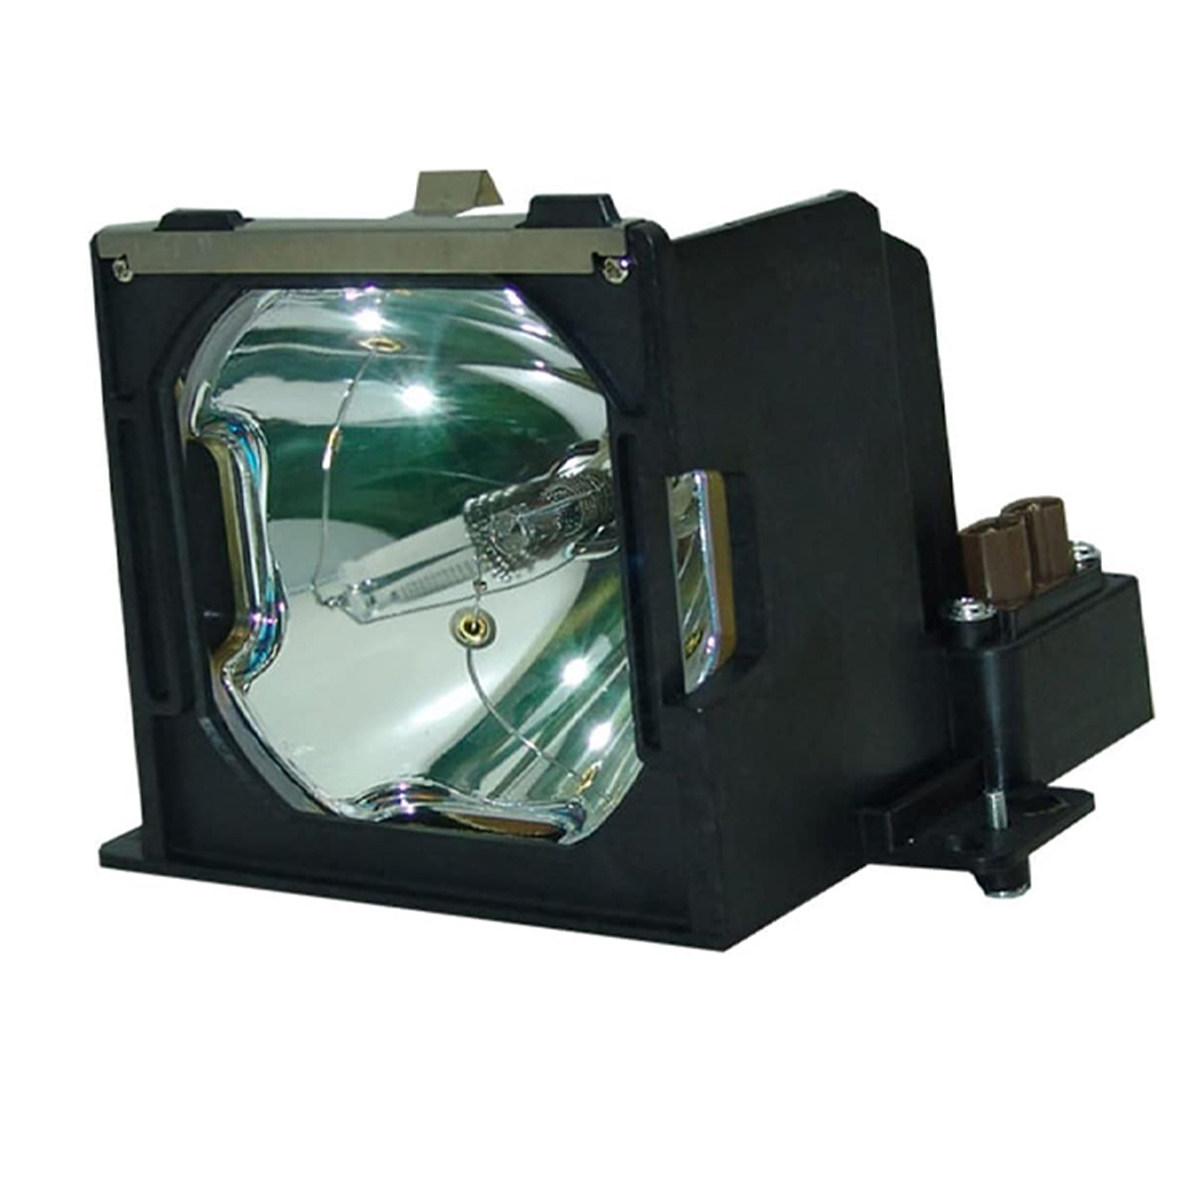 Replacement Projector lamp LV-LP17/9015A001AA For CANON LV-7555